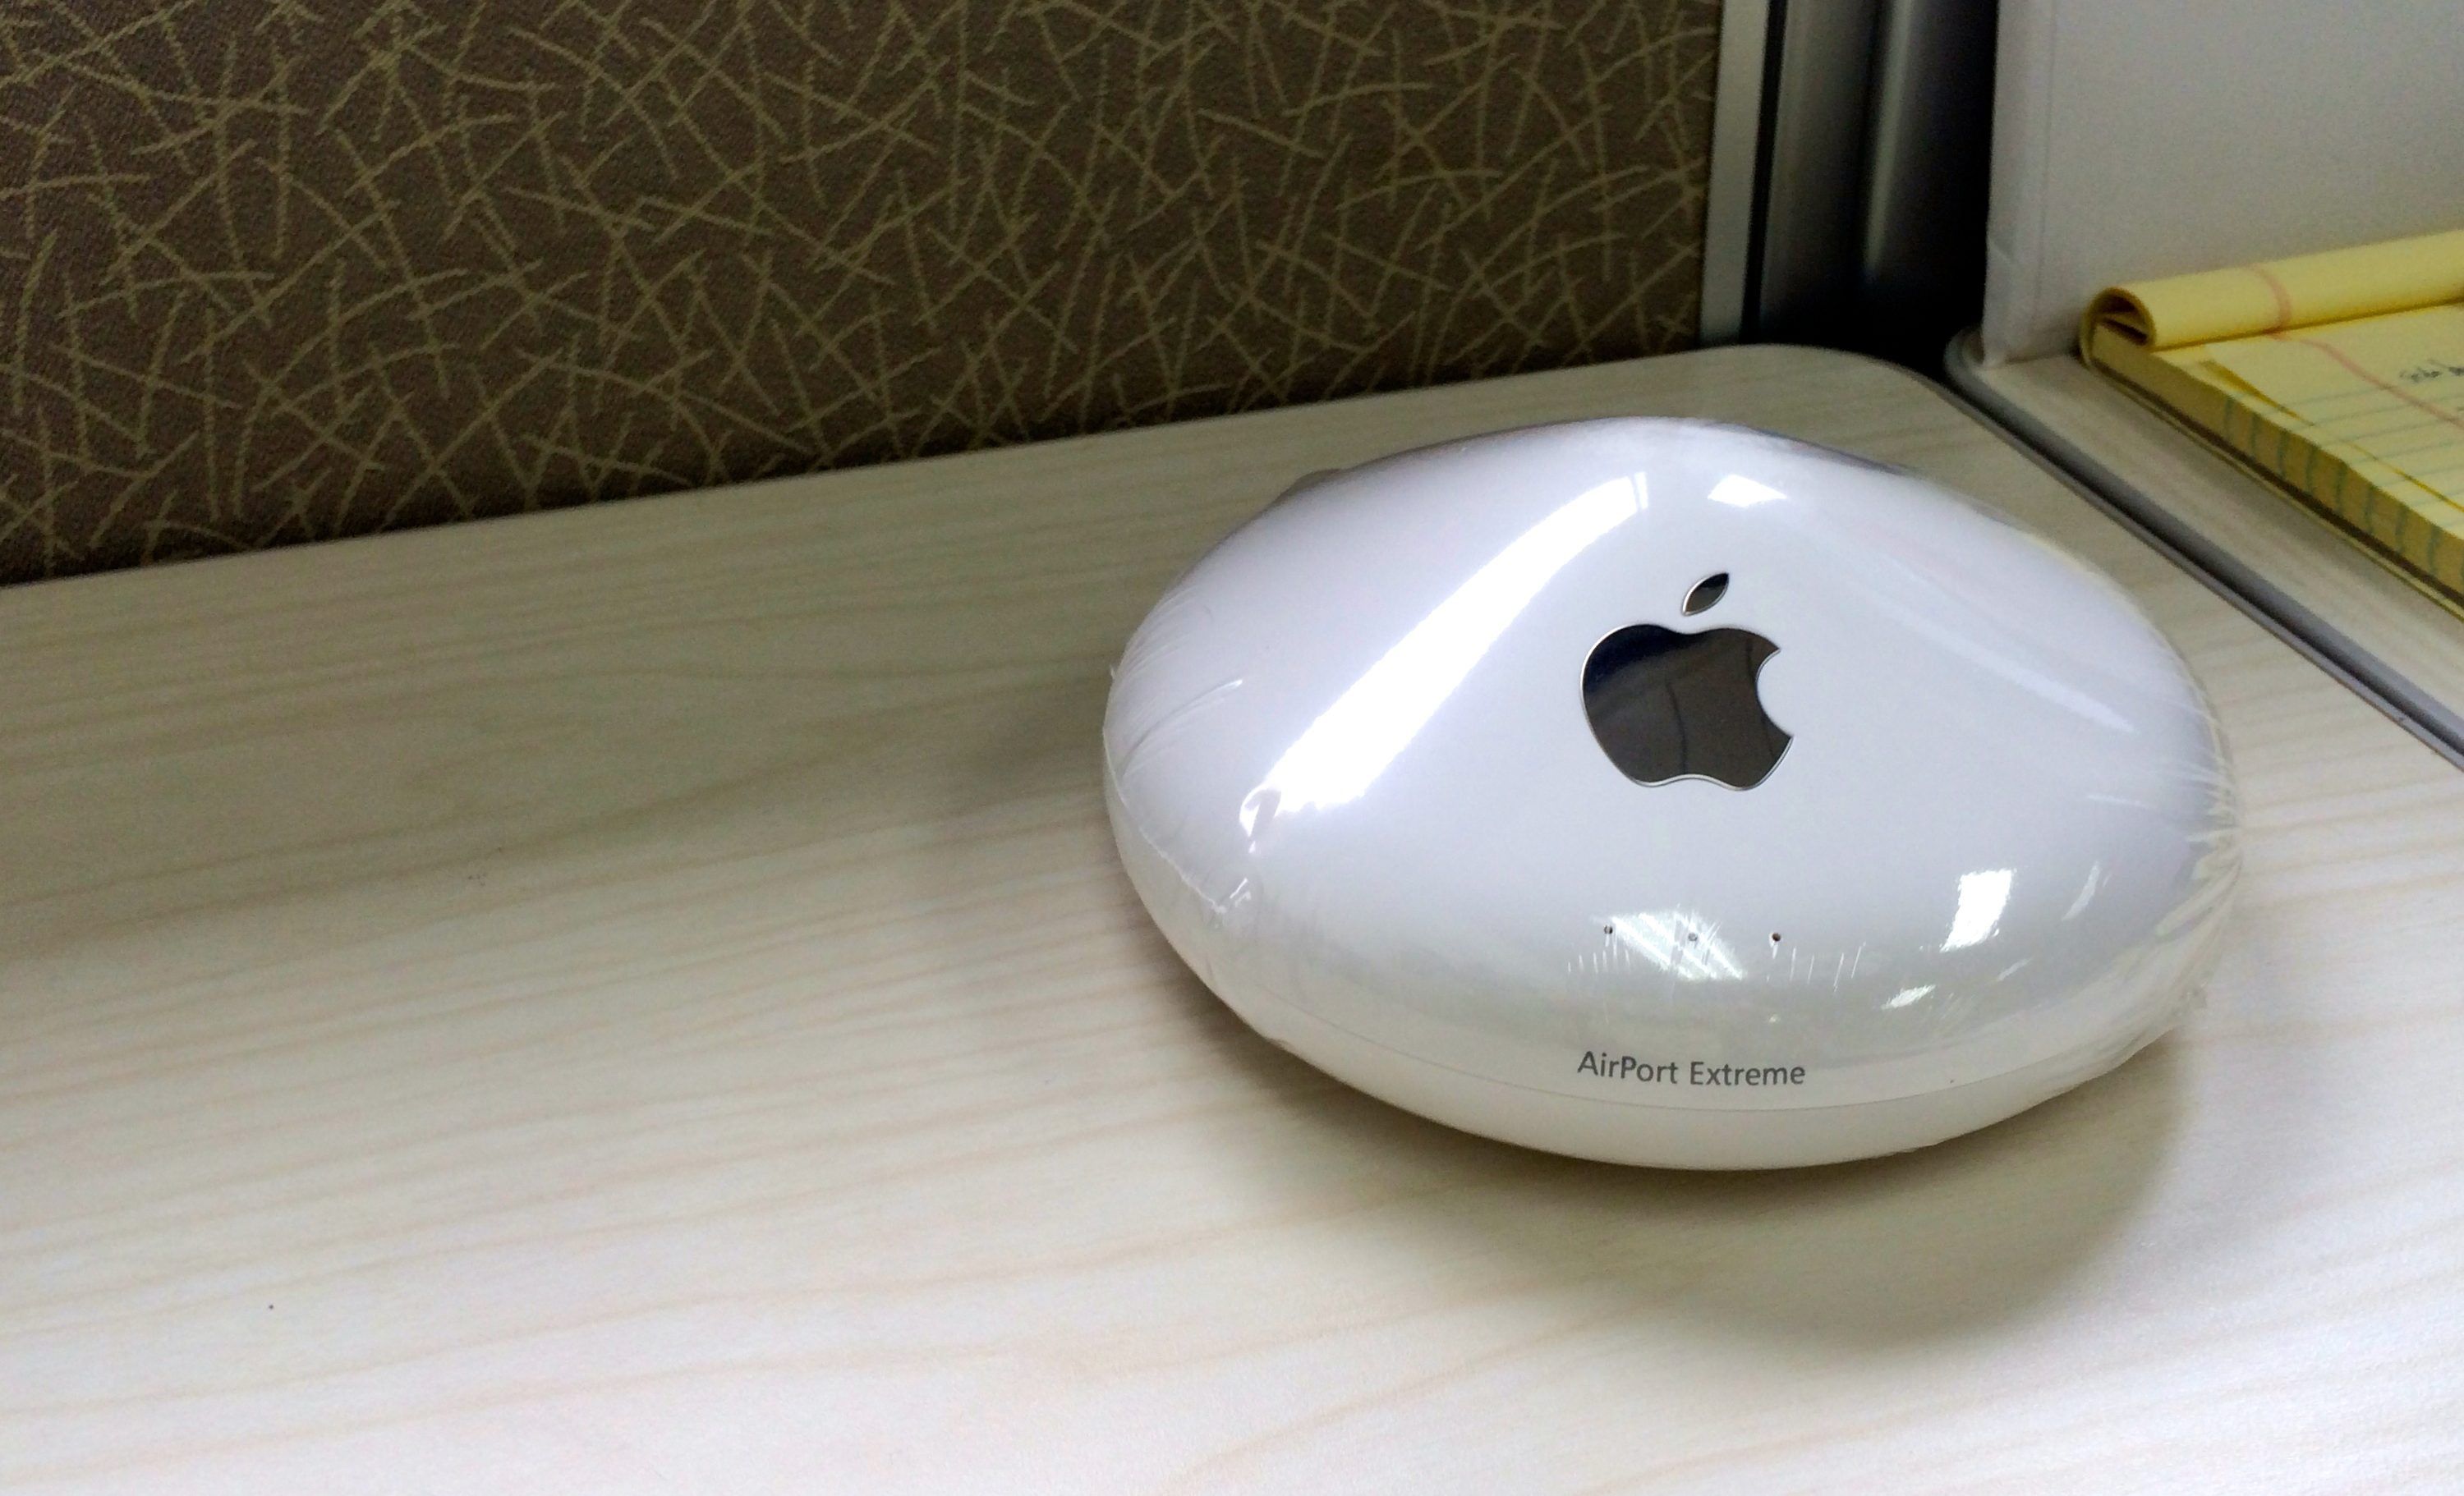 The round, original model of the AirPort Extreme router sits on a table near a wall